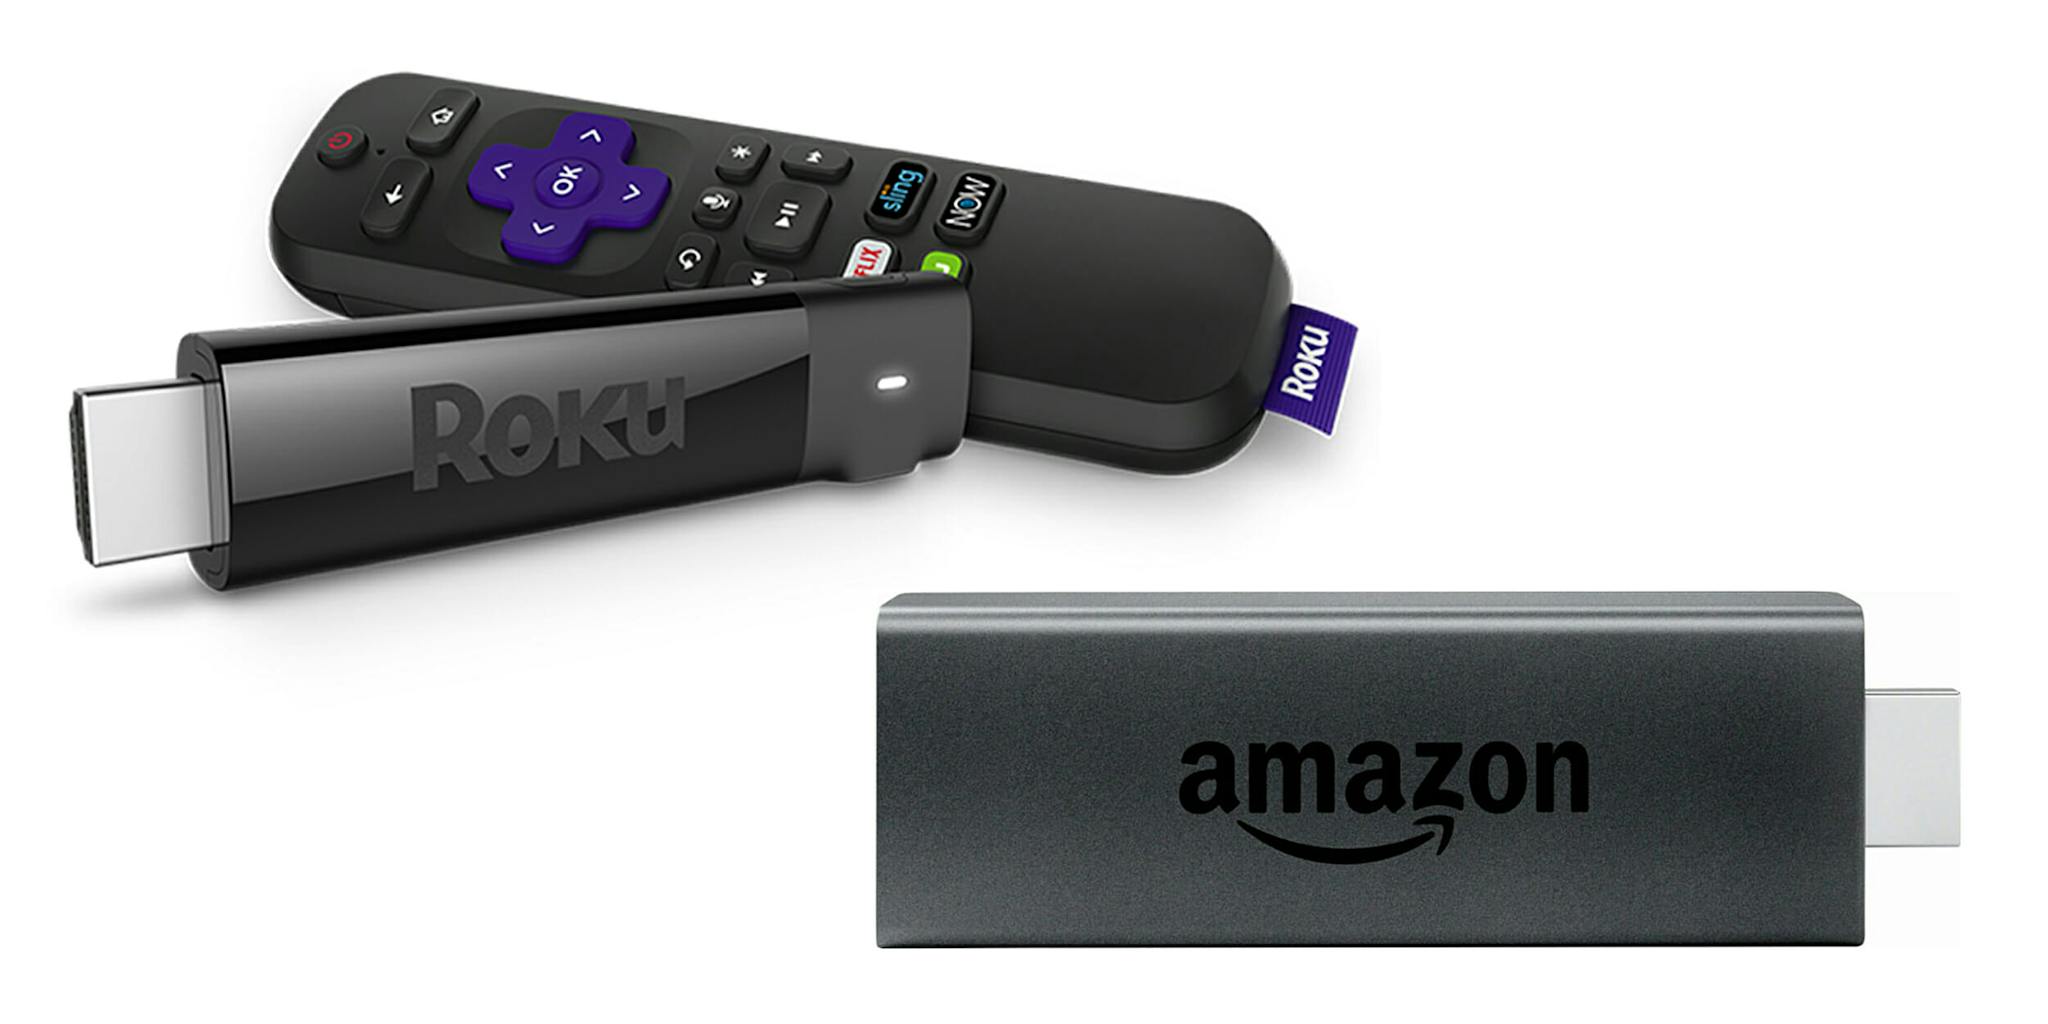 Amazon Fire Stick vs Roku Which Streaming Option Is Best For You?